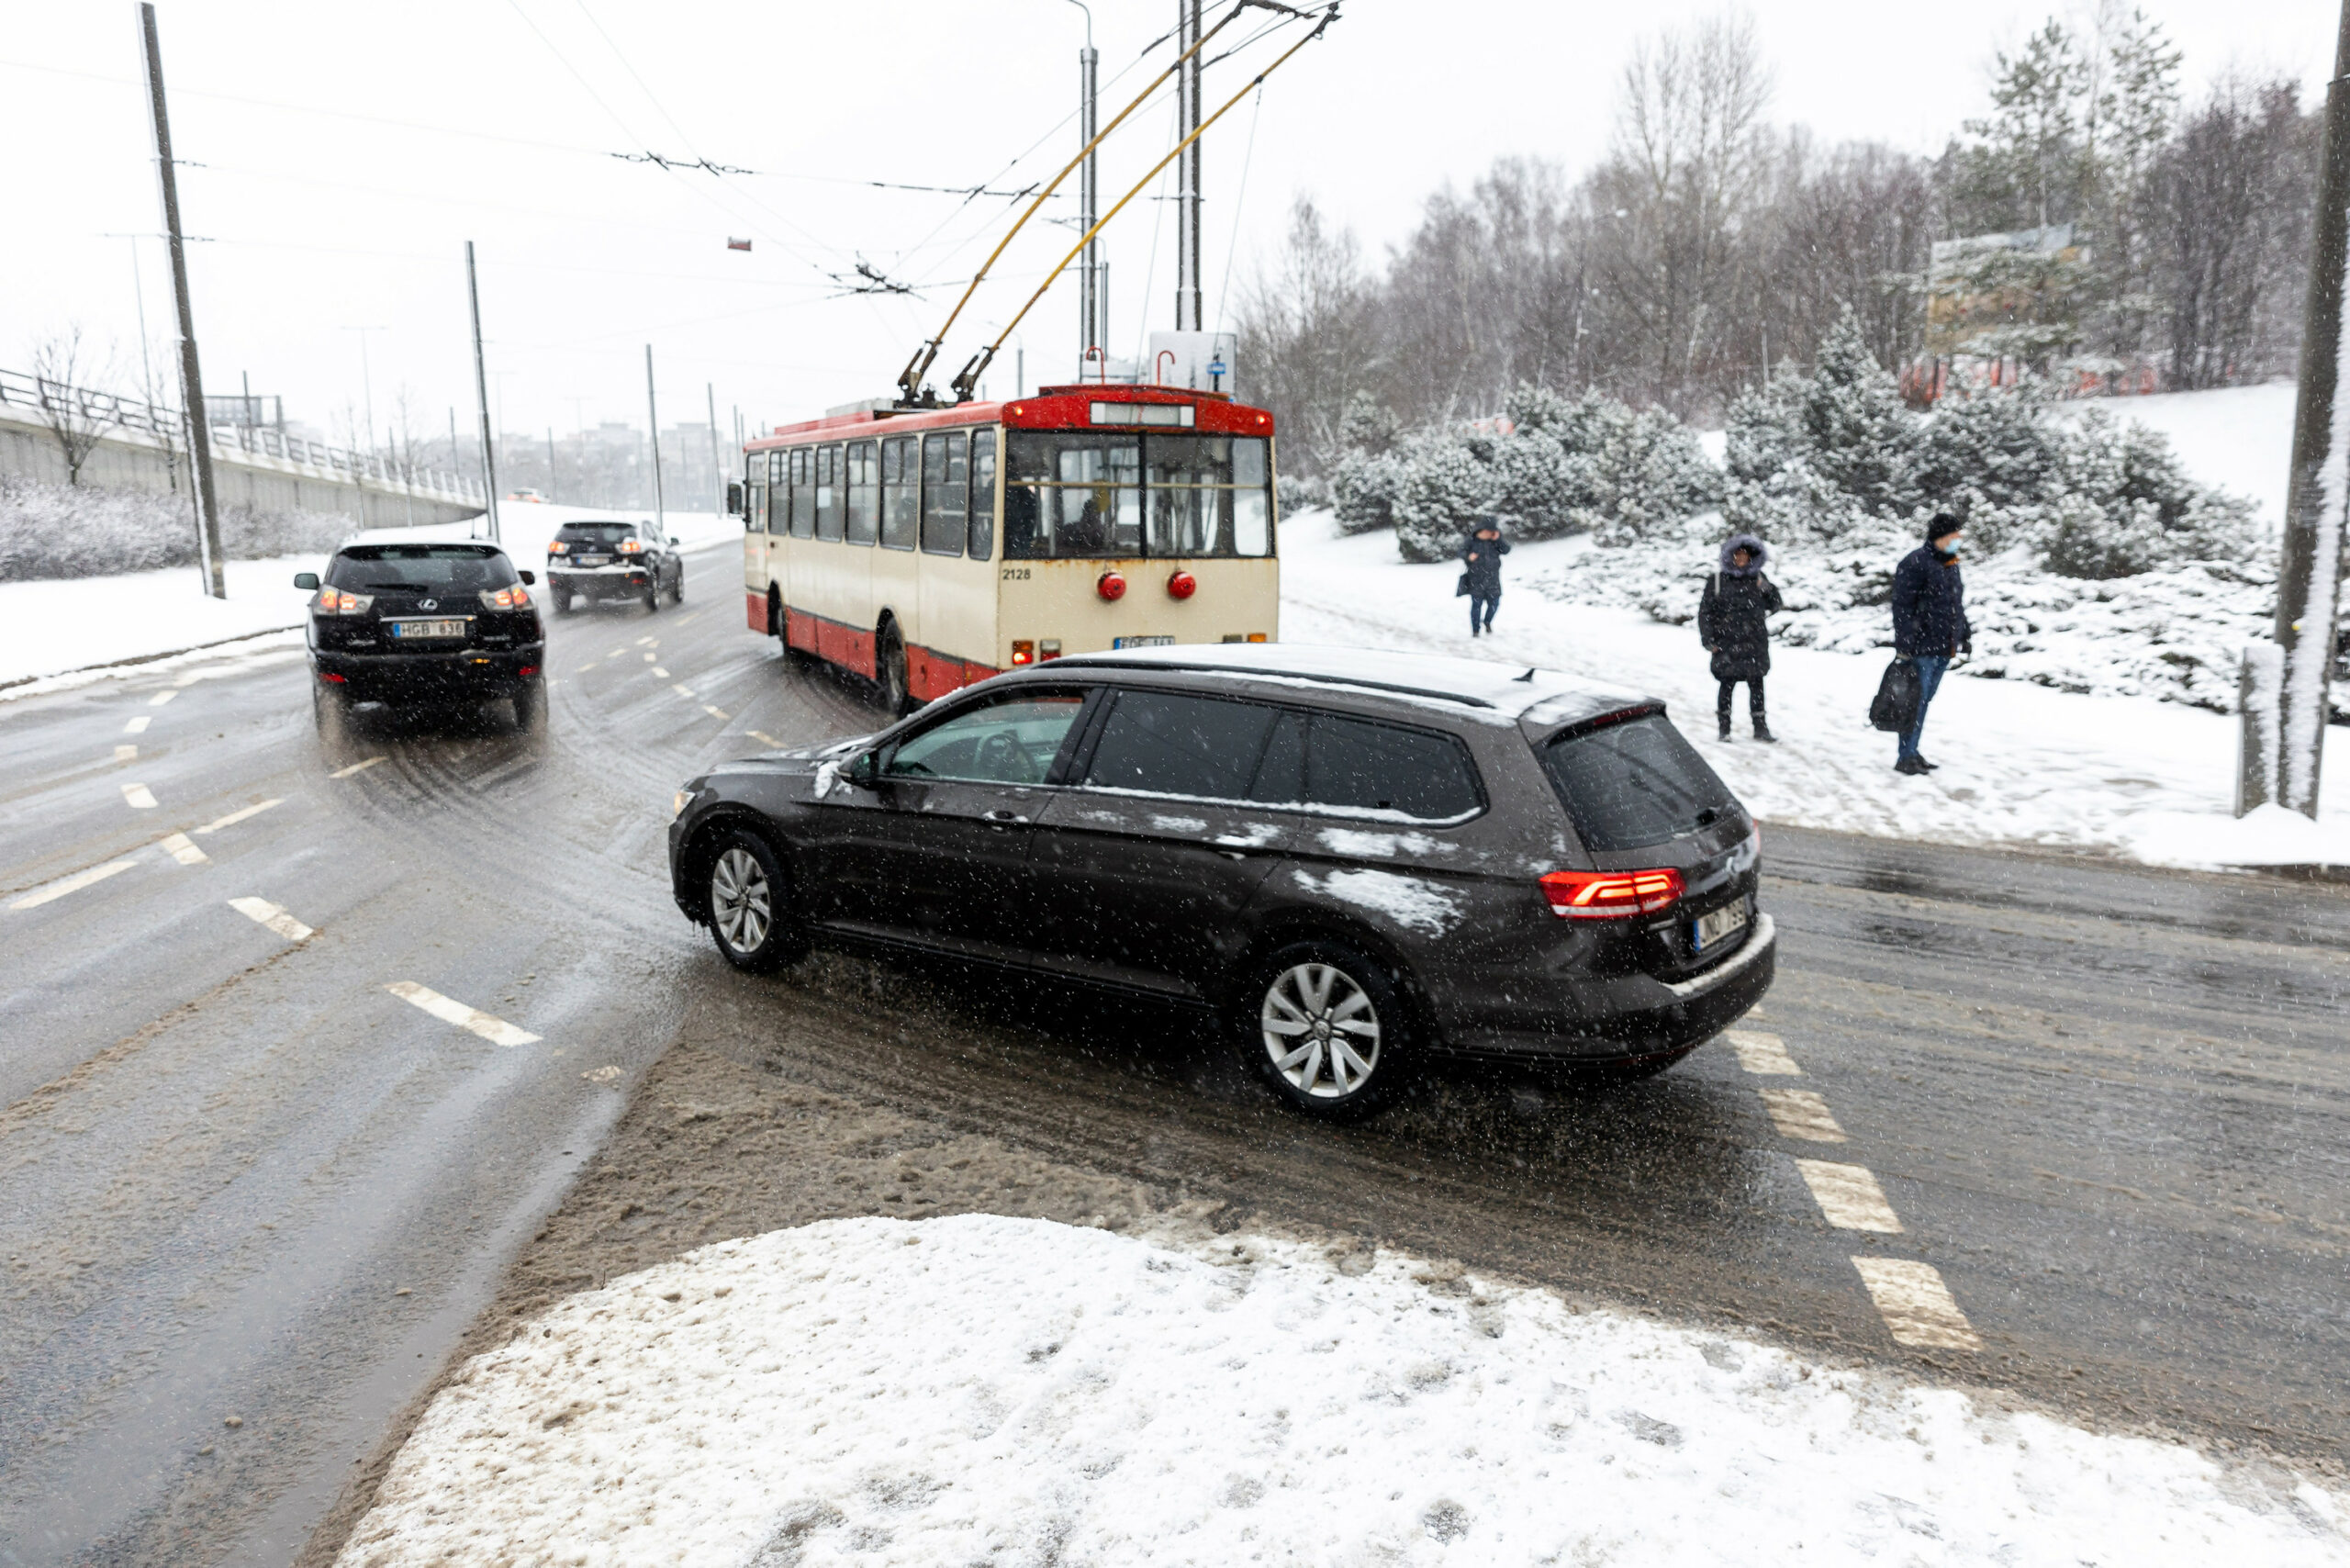 Traffic conditions in Vilnius worsened due to the falling snow. Vilnius, 2022 January 20 (Yygimantas Gedvila/BNS).